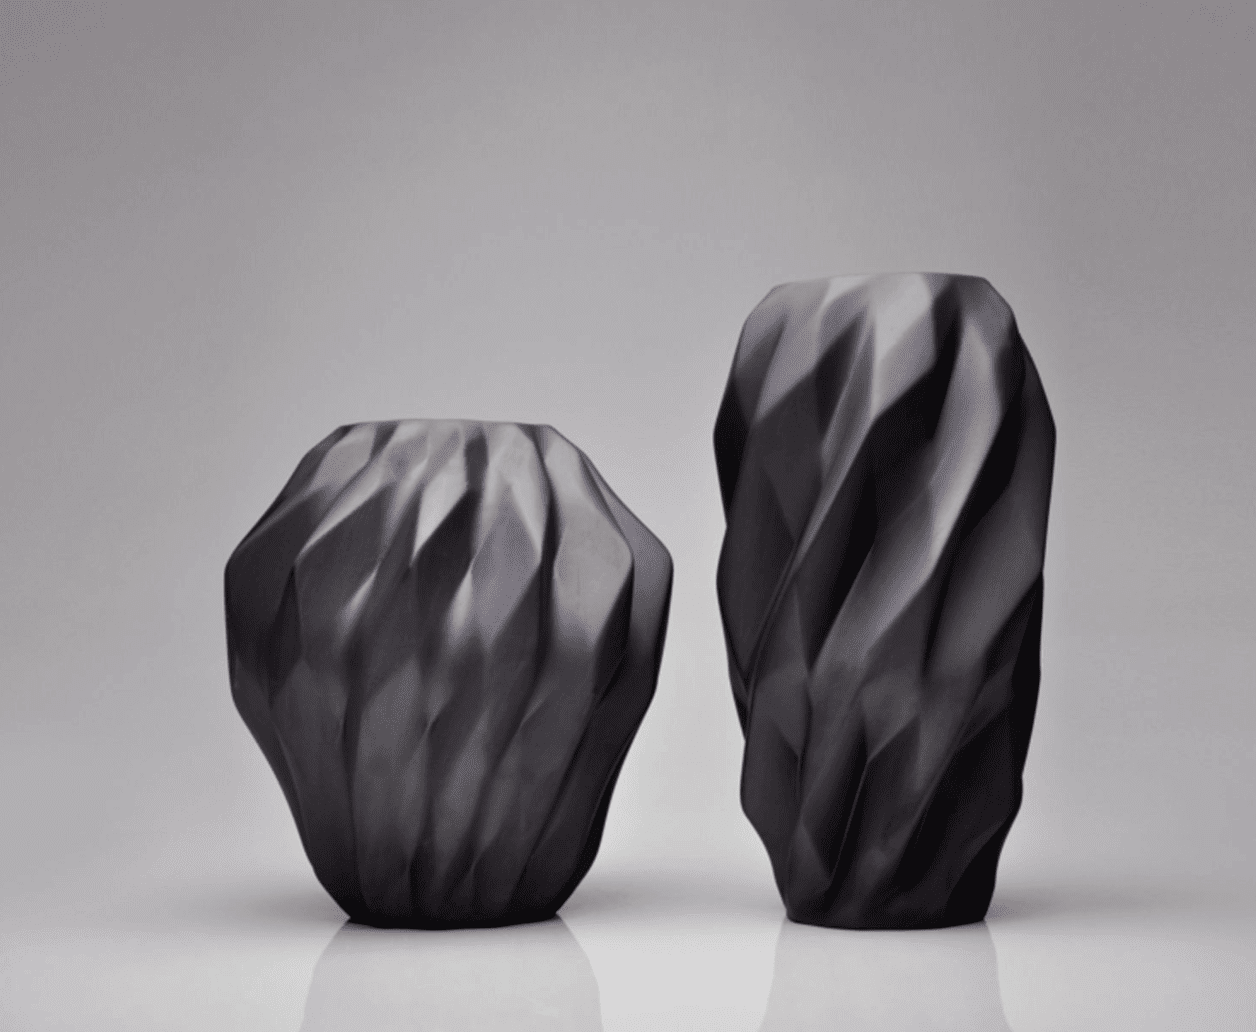 Plissan Geometrical Series vases from Holaria and Kerampozellan; photo from Maison&Objet